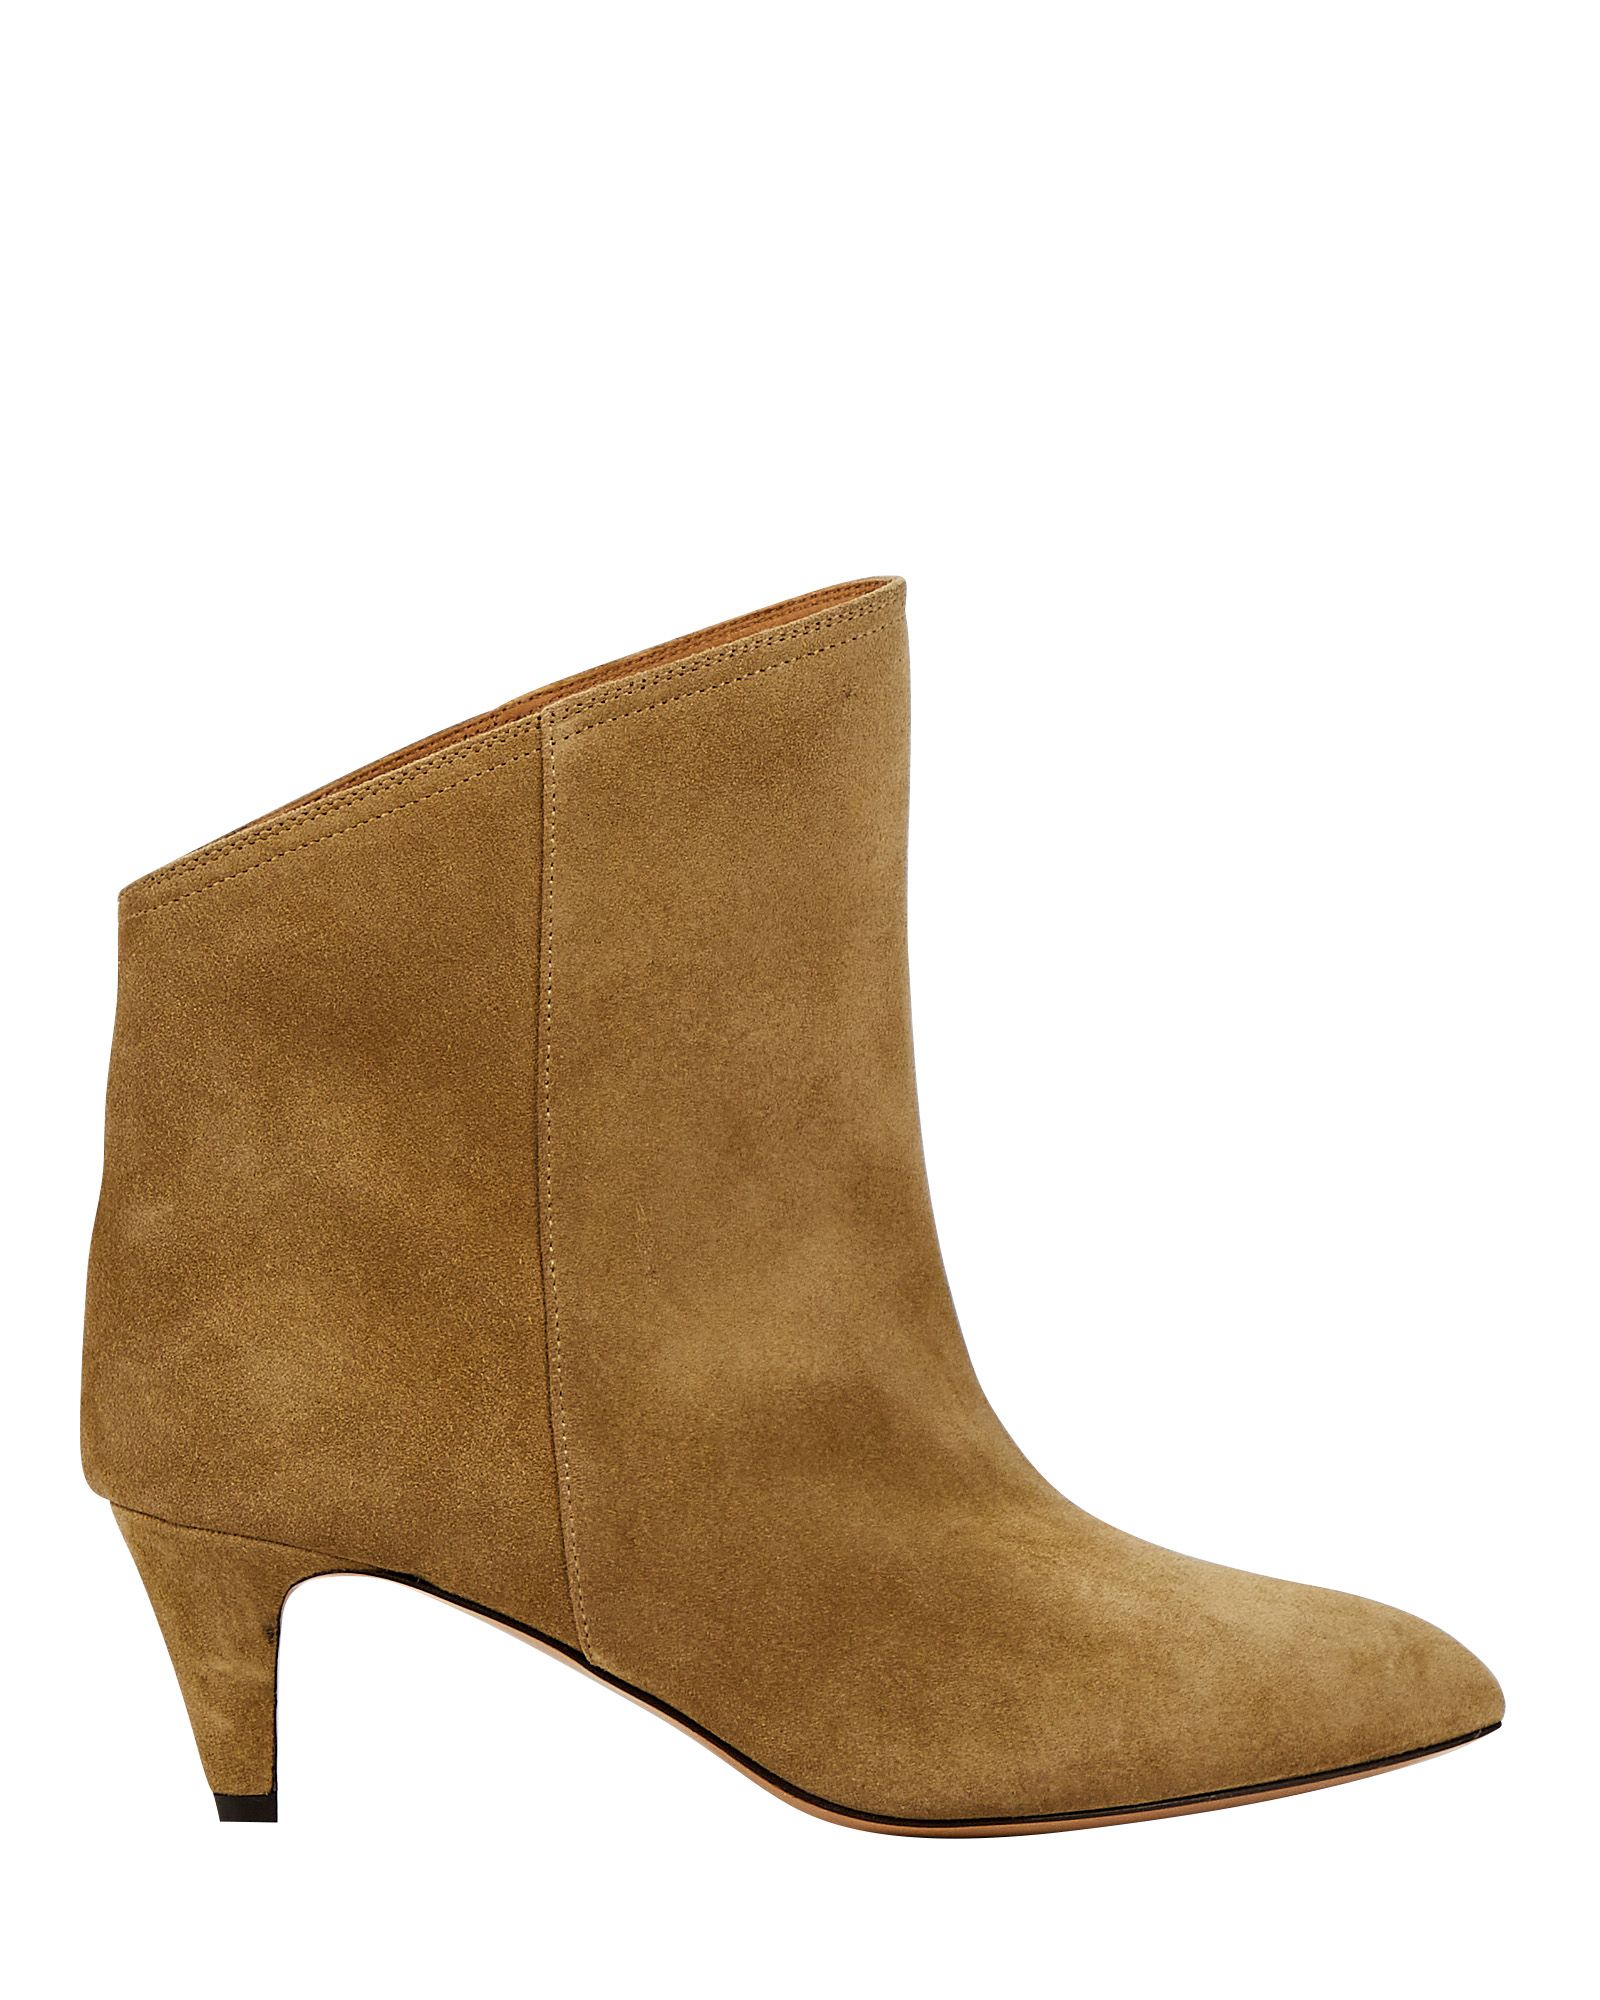 Isabel Marant Dripi Suede Ankle Boots, Beige 41 | INTERMIX